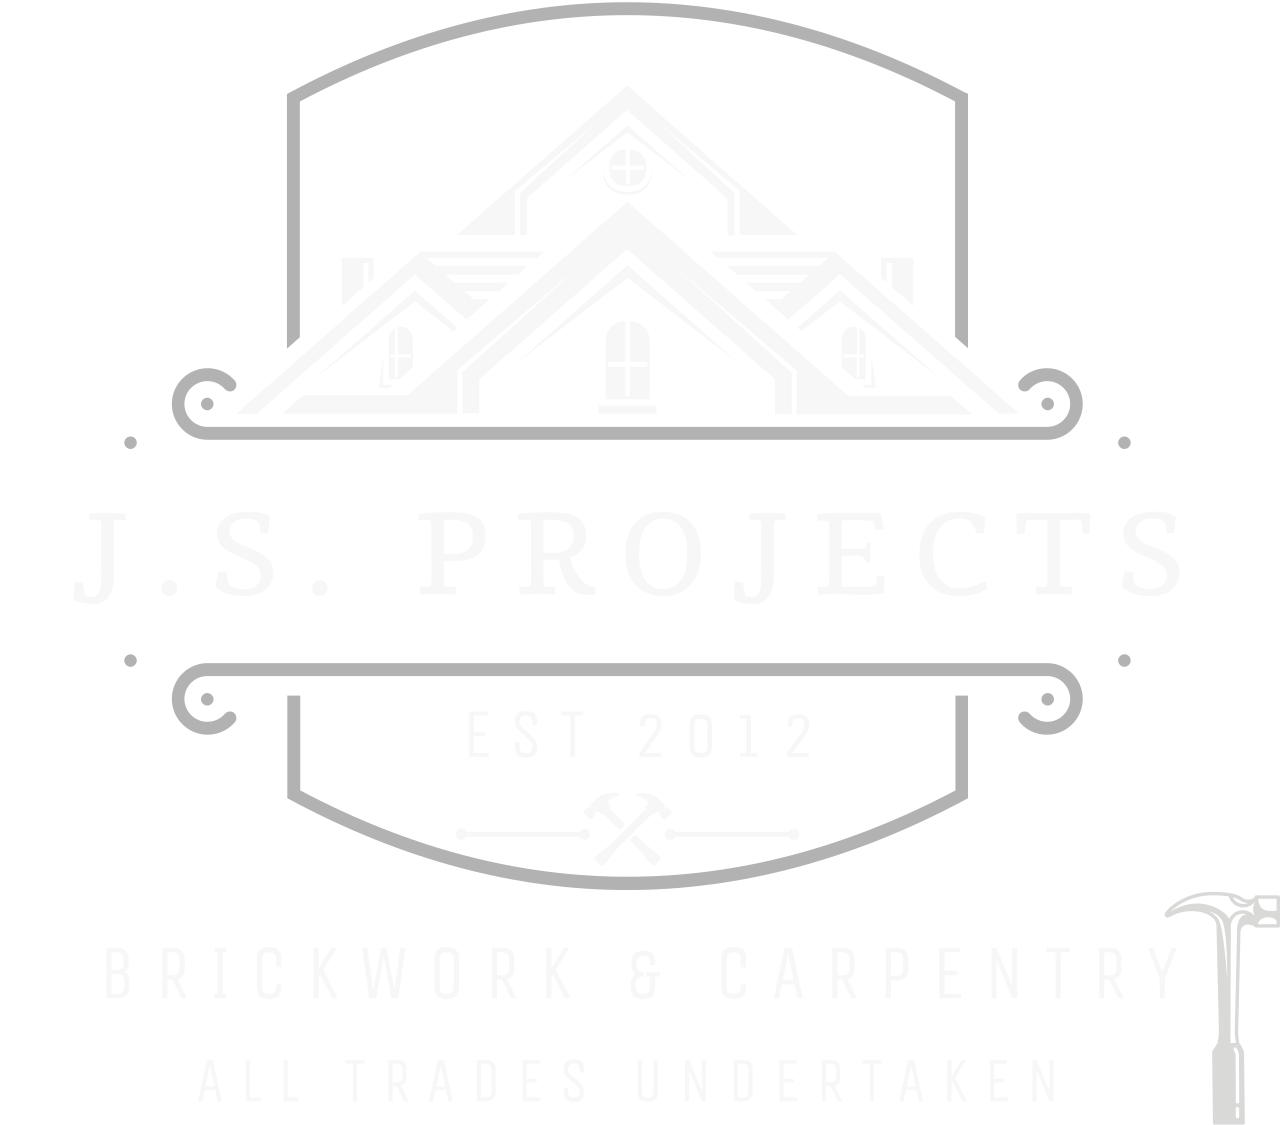 J.S. Projects 's logo